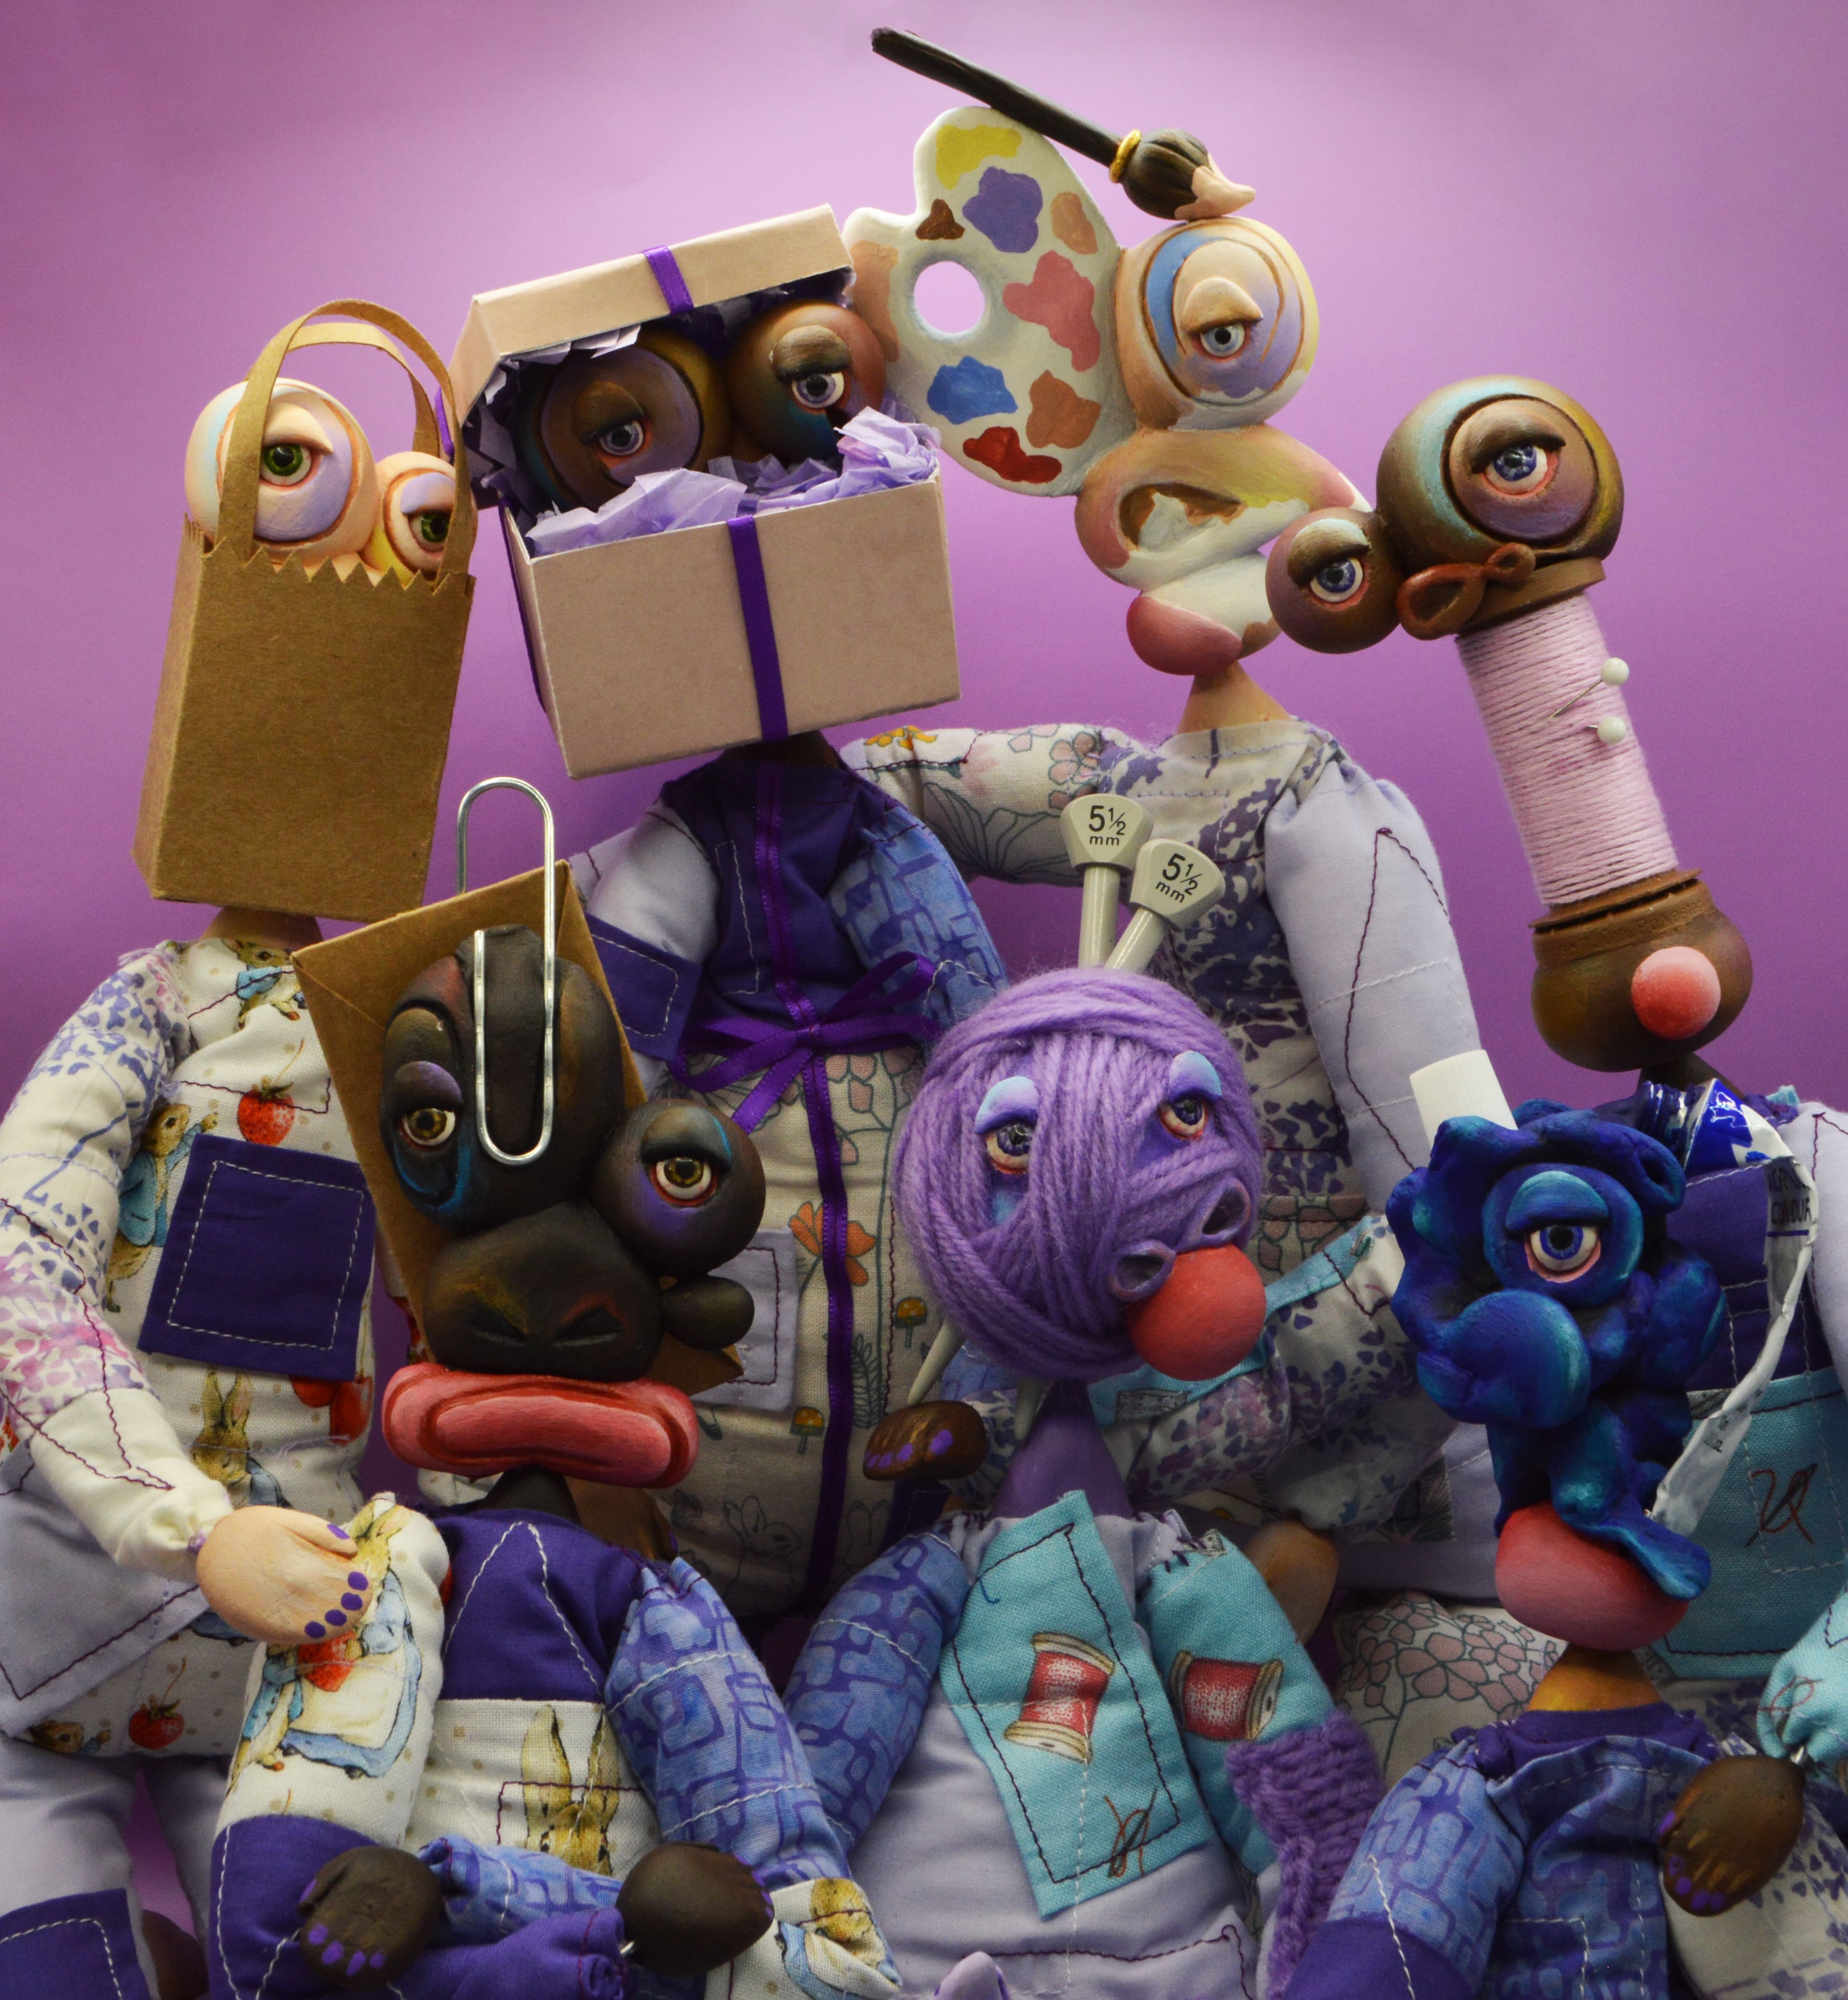 Fine Art work by Kimberley Gaskin showing arts and crafts themed dolls with patchwork bodies.